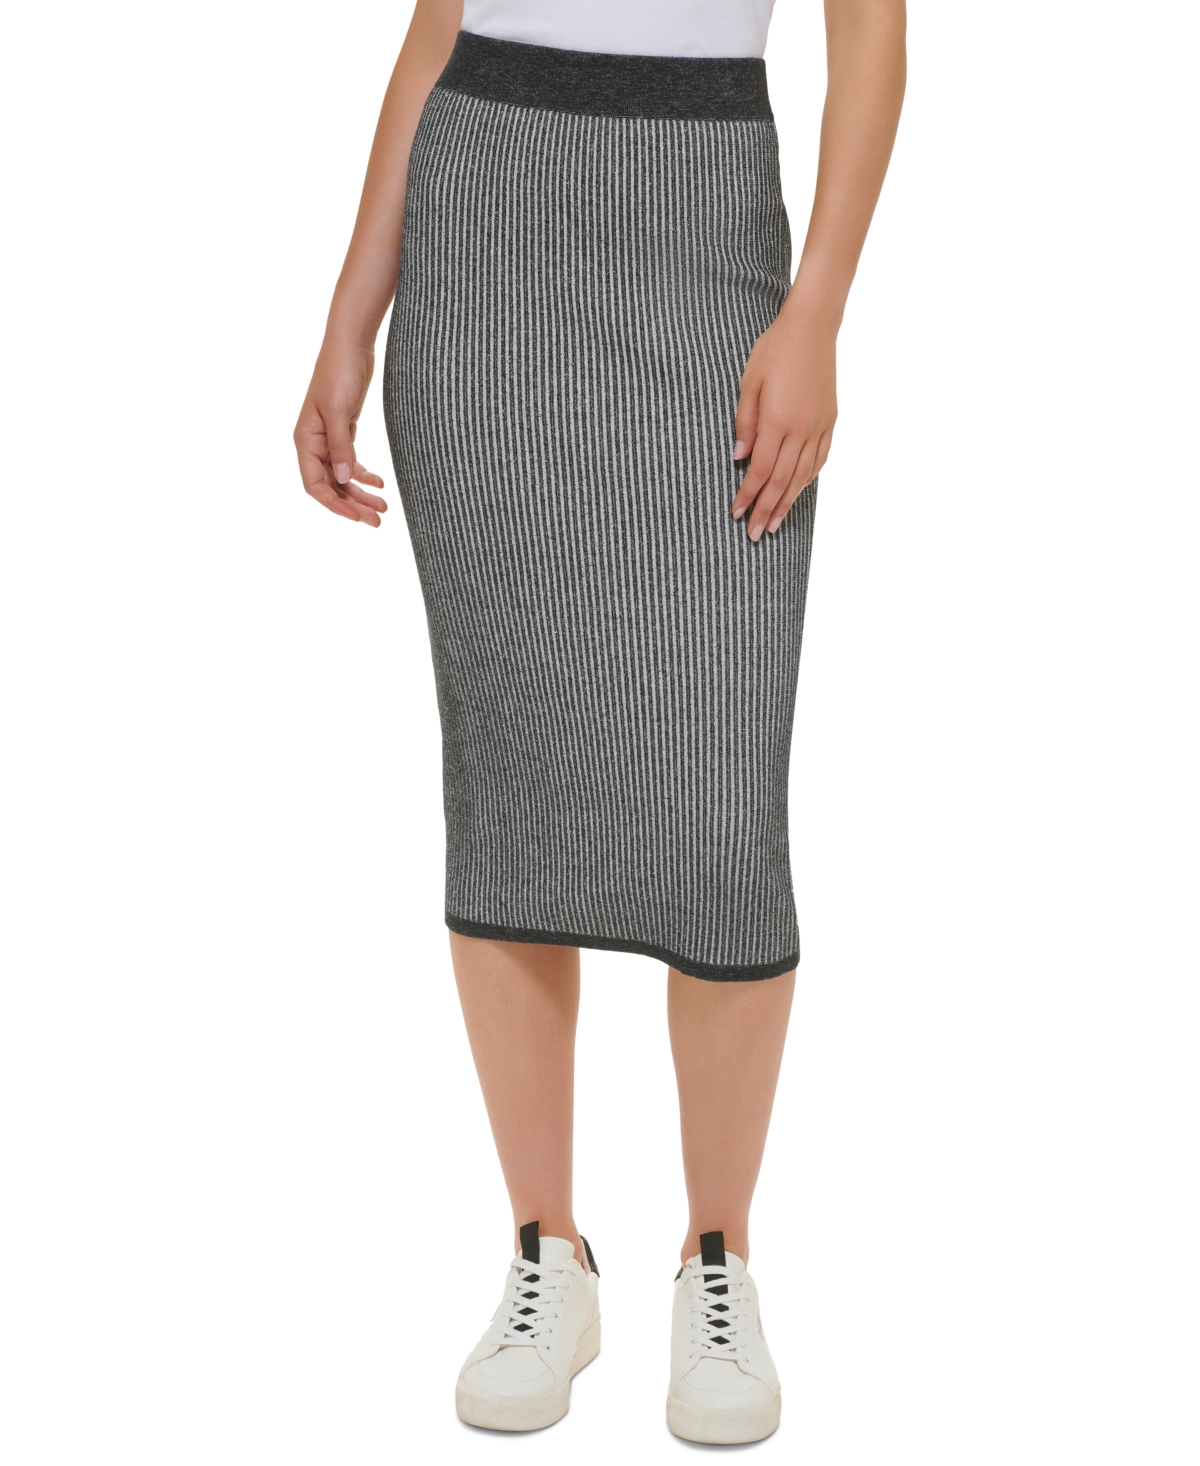 Dkny Jeans Women's Ribbed Pull-On Close-Fitting Midi Skirt